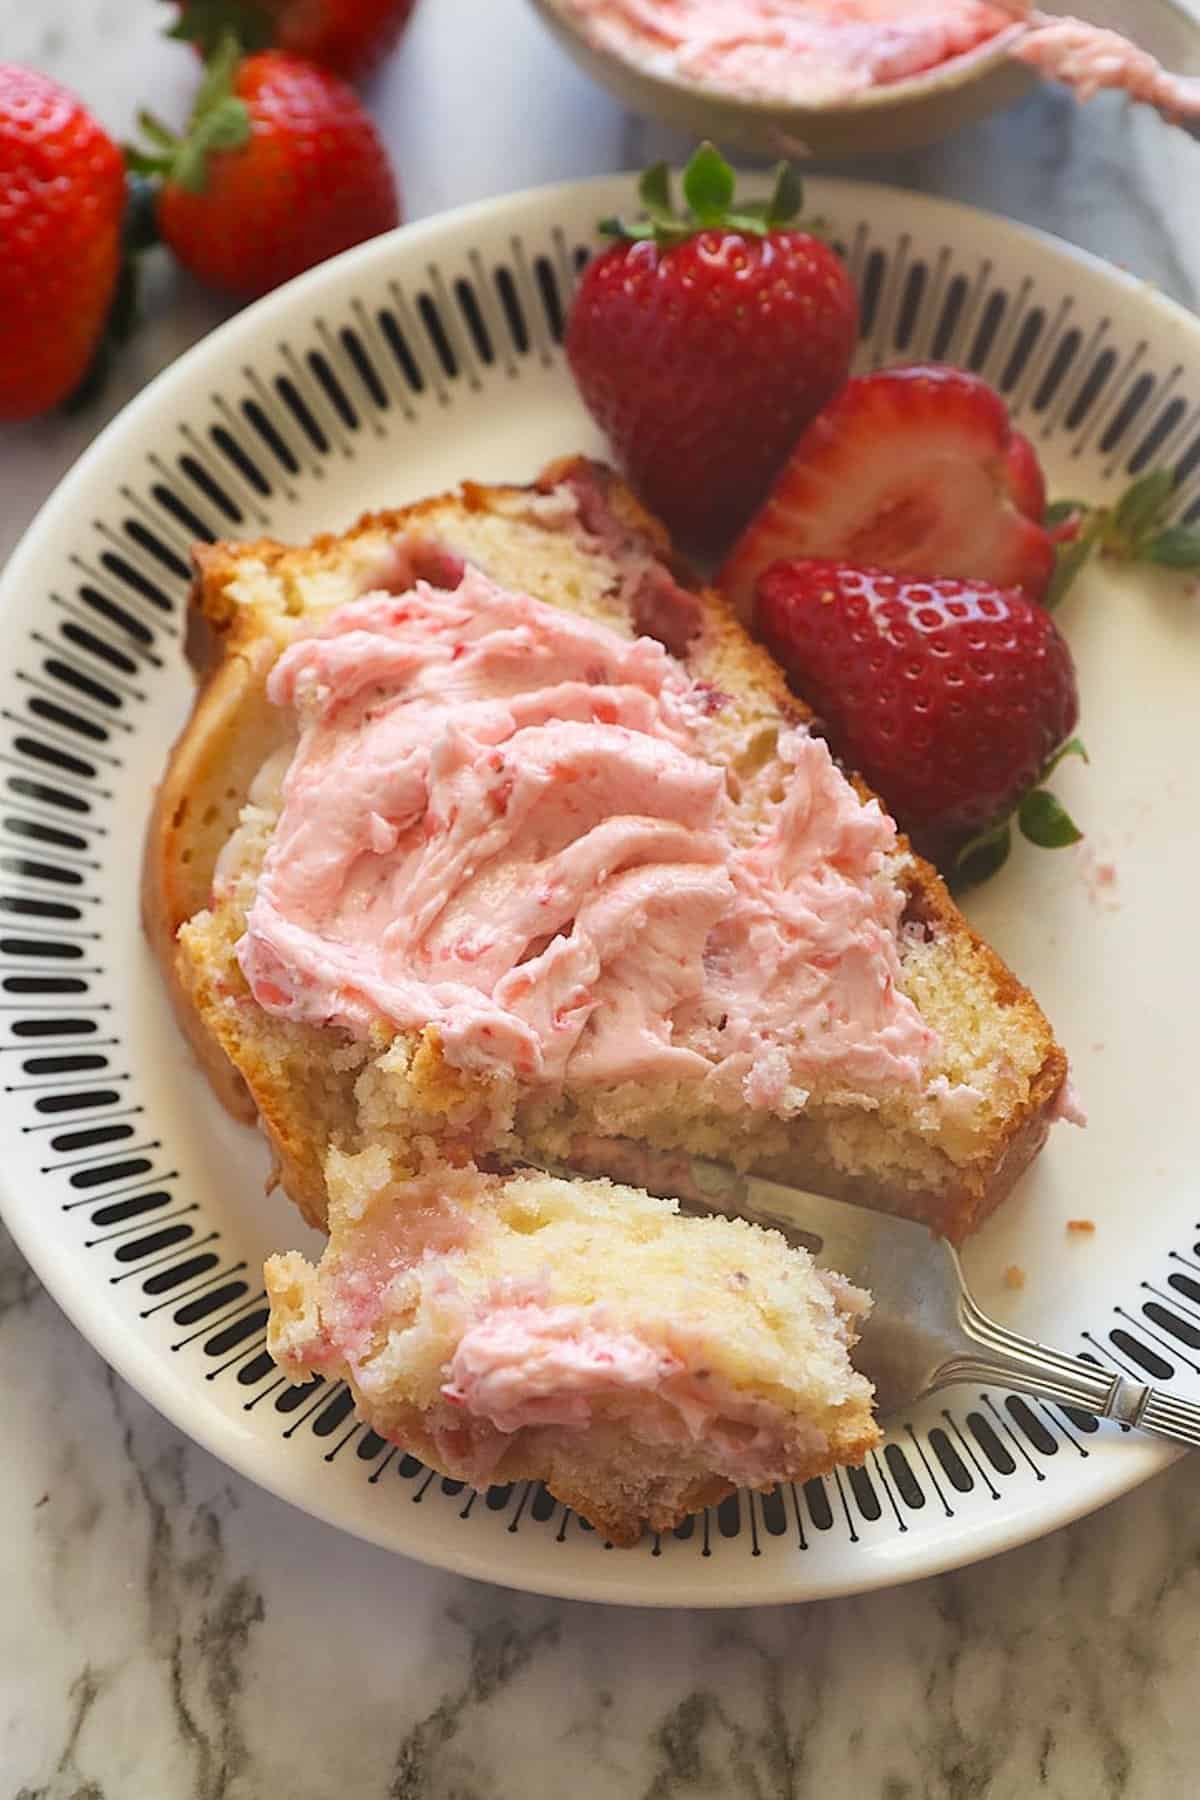 Slathering a freshly baked slice of strawberry bread with strawberry cream cheese